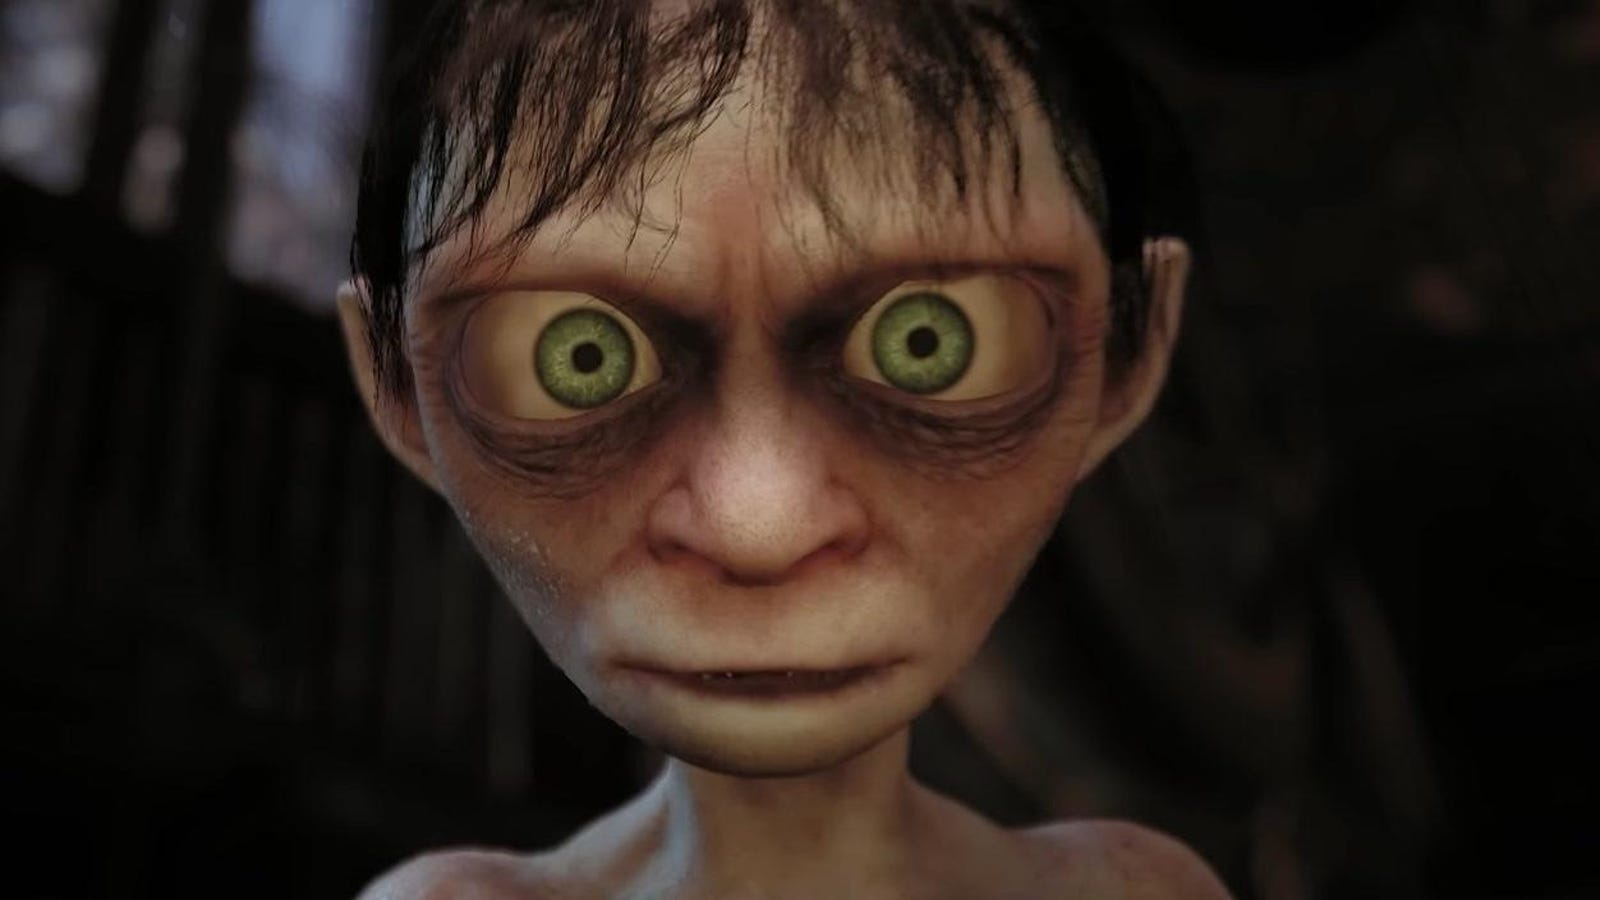 Lord of the Rings: Gollum' Video Game in the Works – The Hollywood